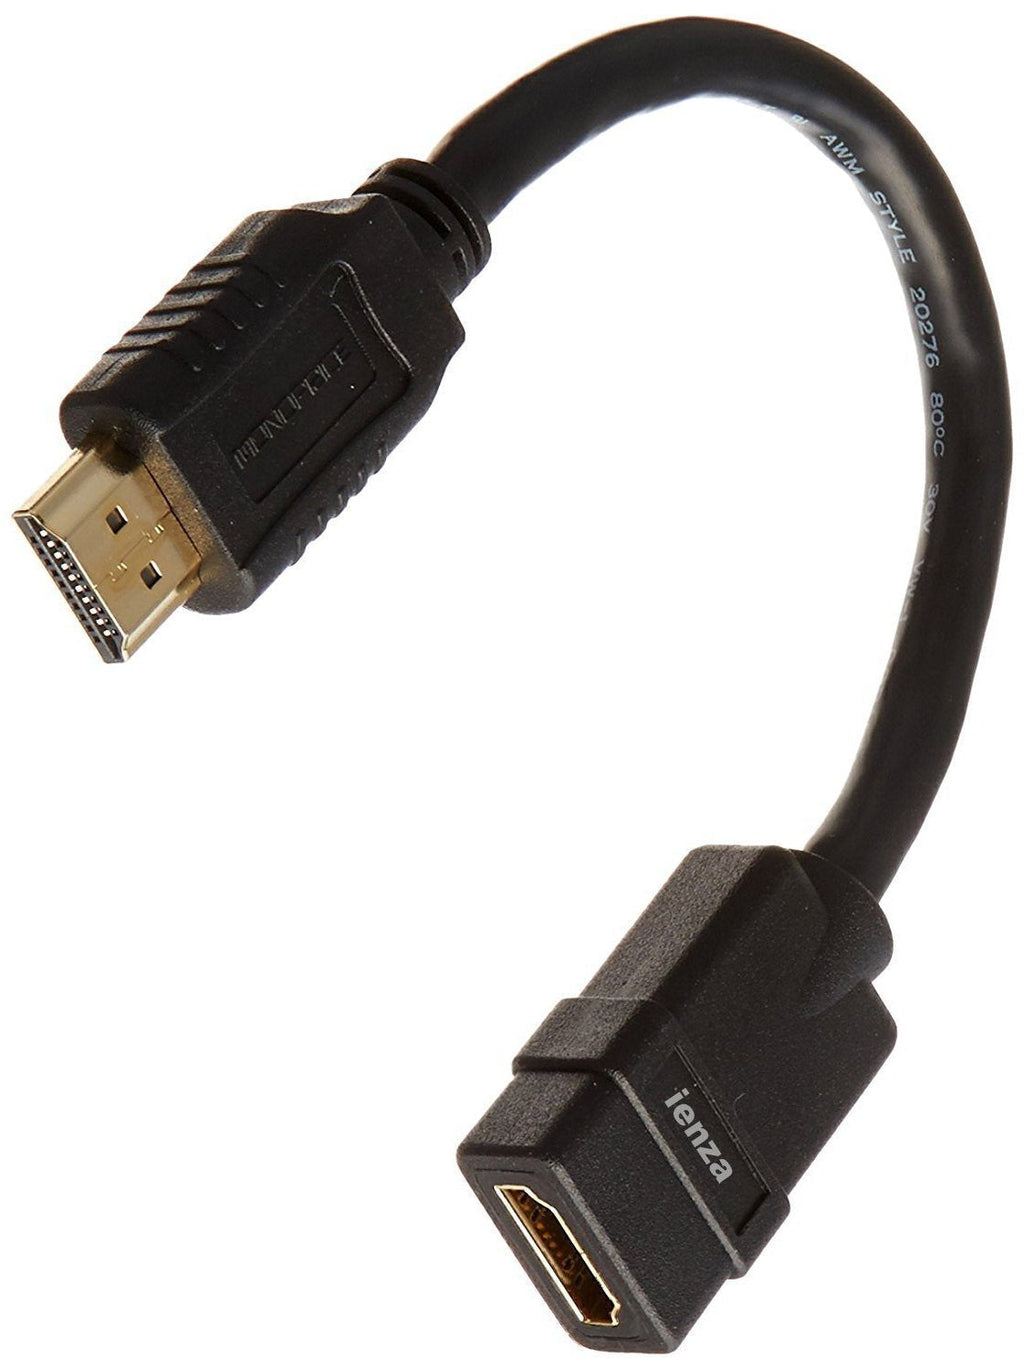 Short (8-inch) 28AWG High Speed Male to Female HDMI Port-Extender/Port-Saver by ienza